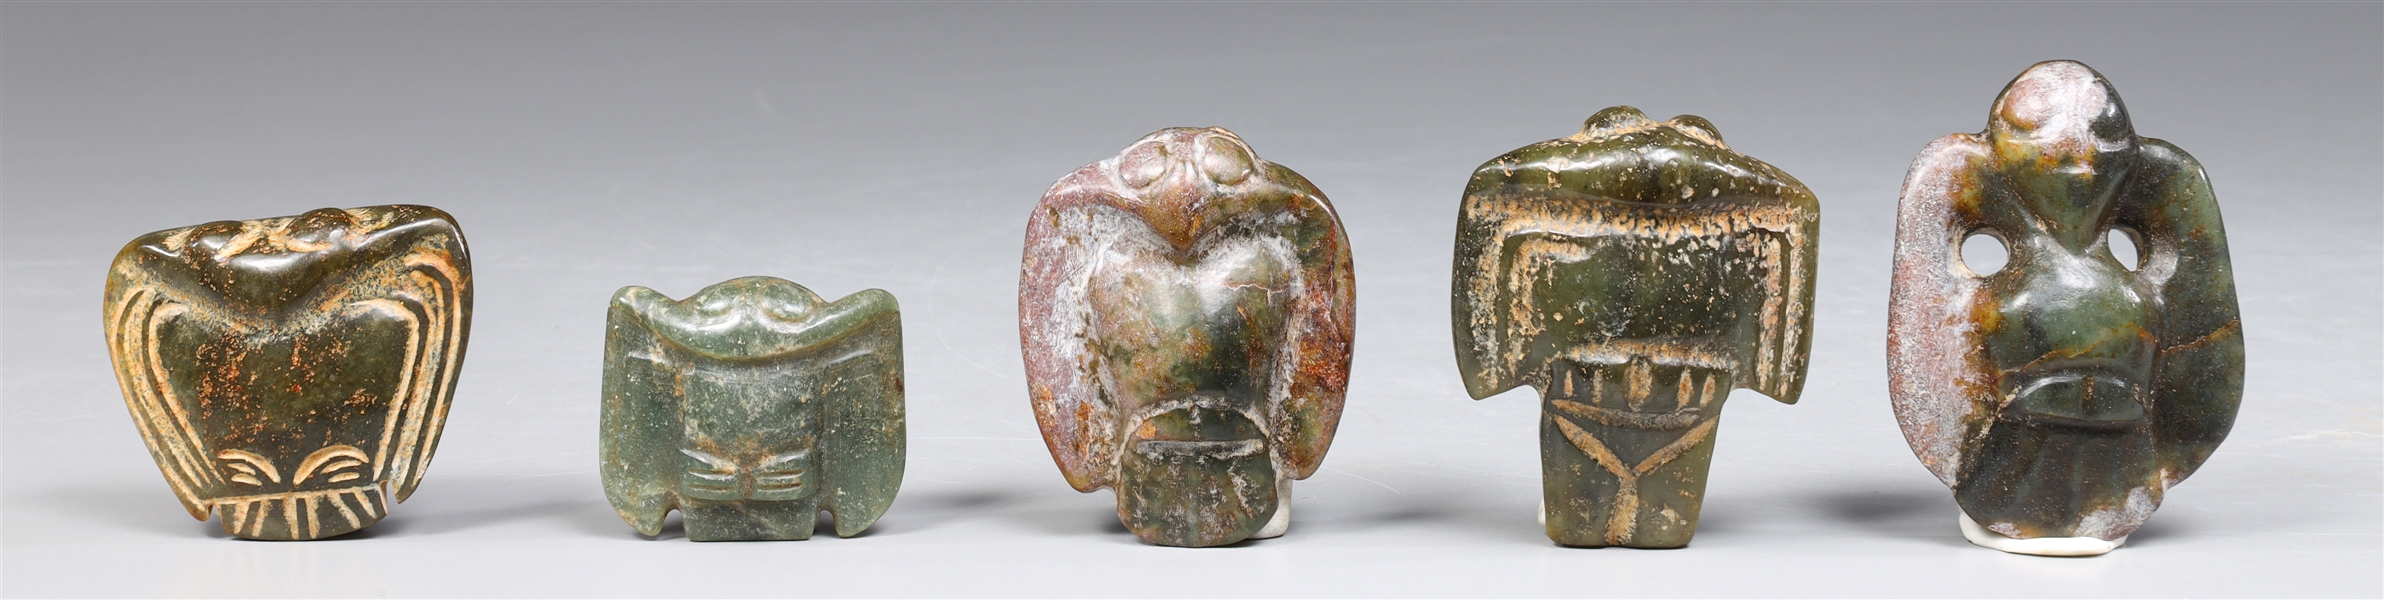 Group of five archaic Chinese style